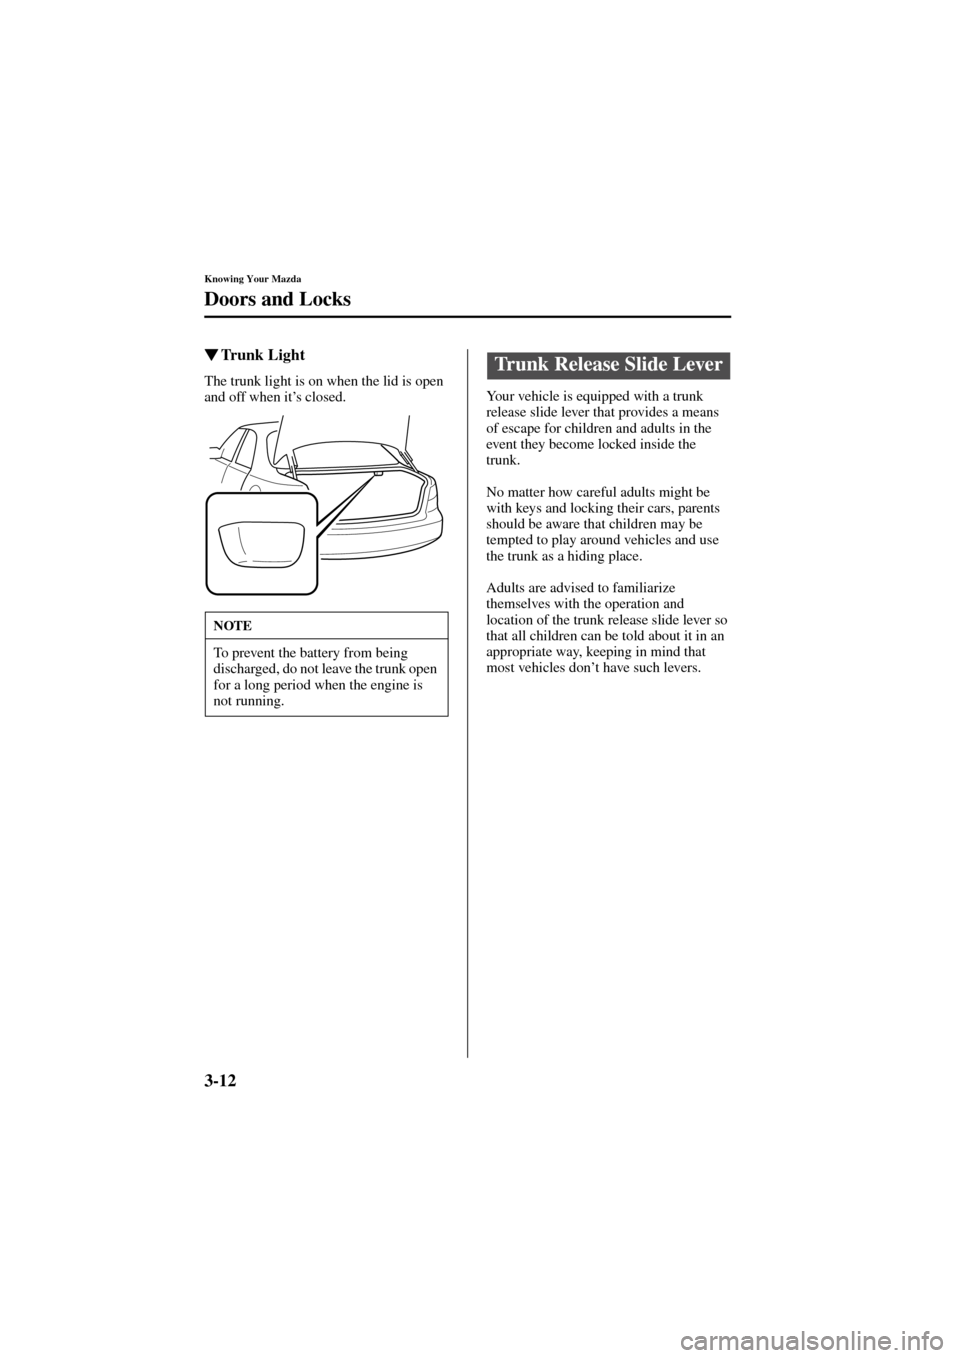 MAZDA MODEL 6 2004  Owners Manual (in English) 3-12
Knowing Your Mazda
Doors and Locks
Form No. 8R29-EA-02I
Trunk Light
The trunk light is on when the lid is open 
and off when it’s closed.Your vehicle is equipped with a trunk 
release slide le